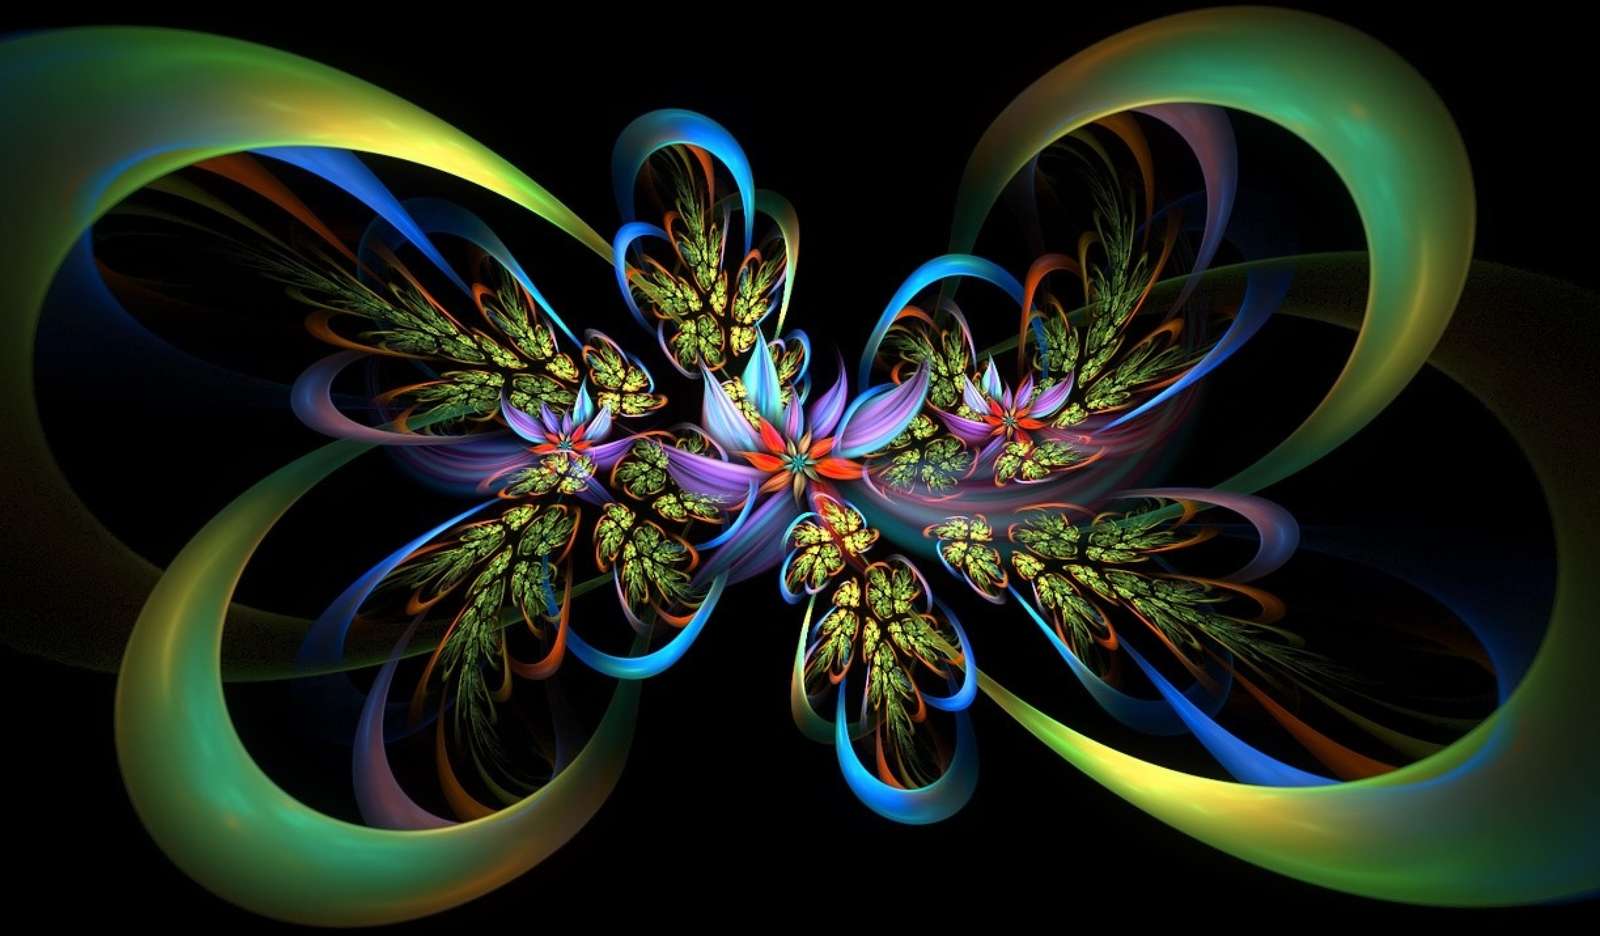 Floral abstraction online puzzle